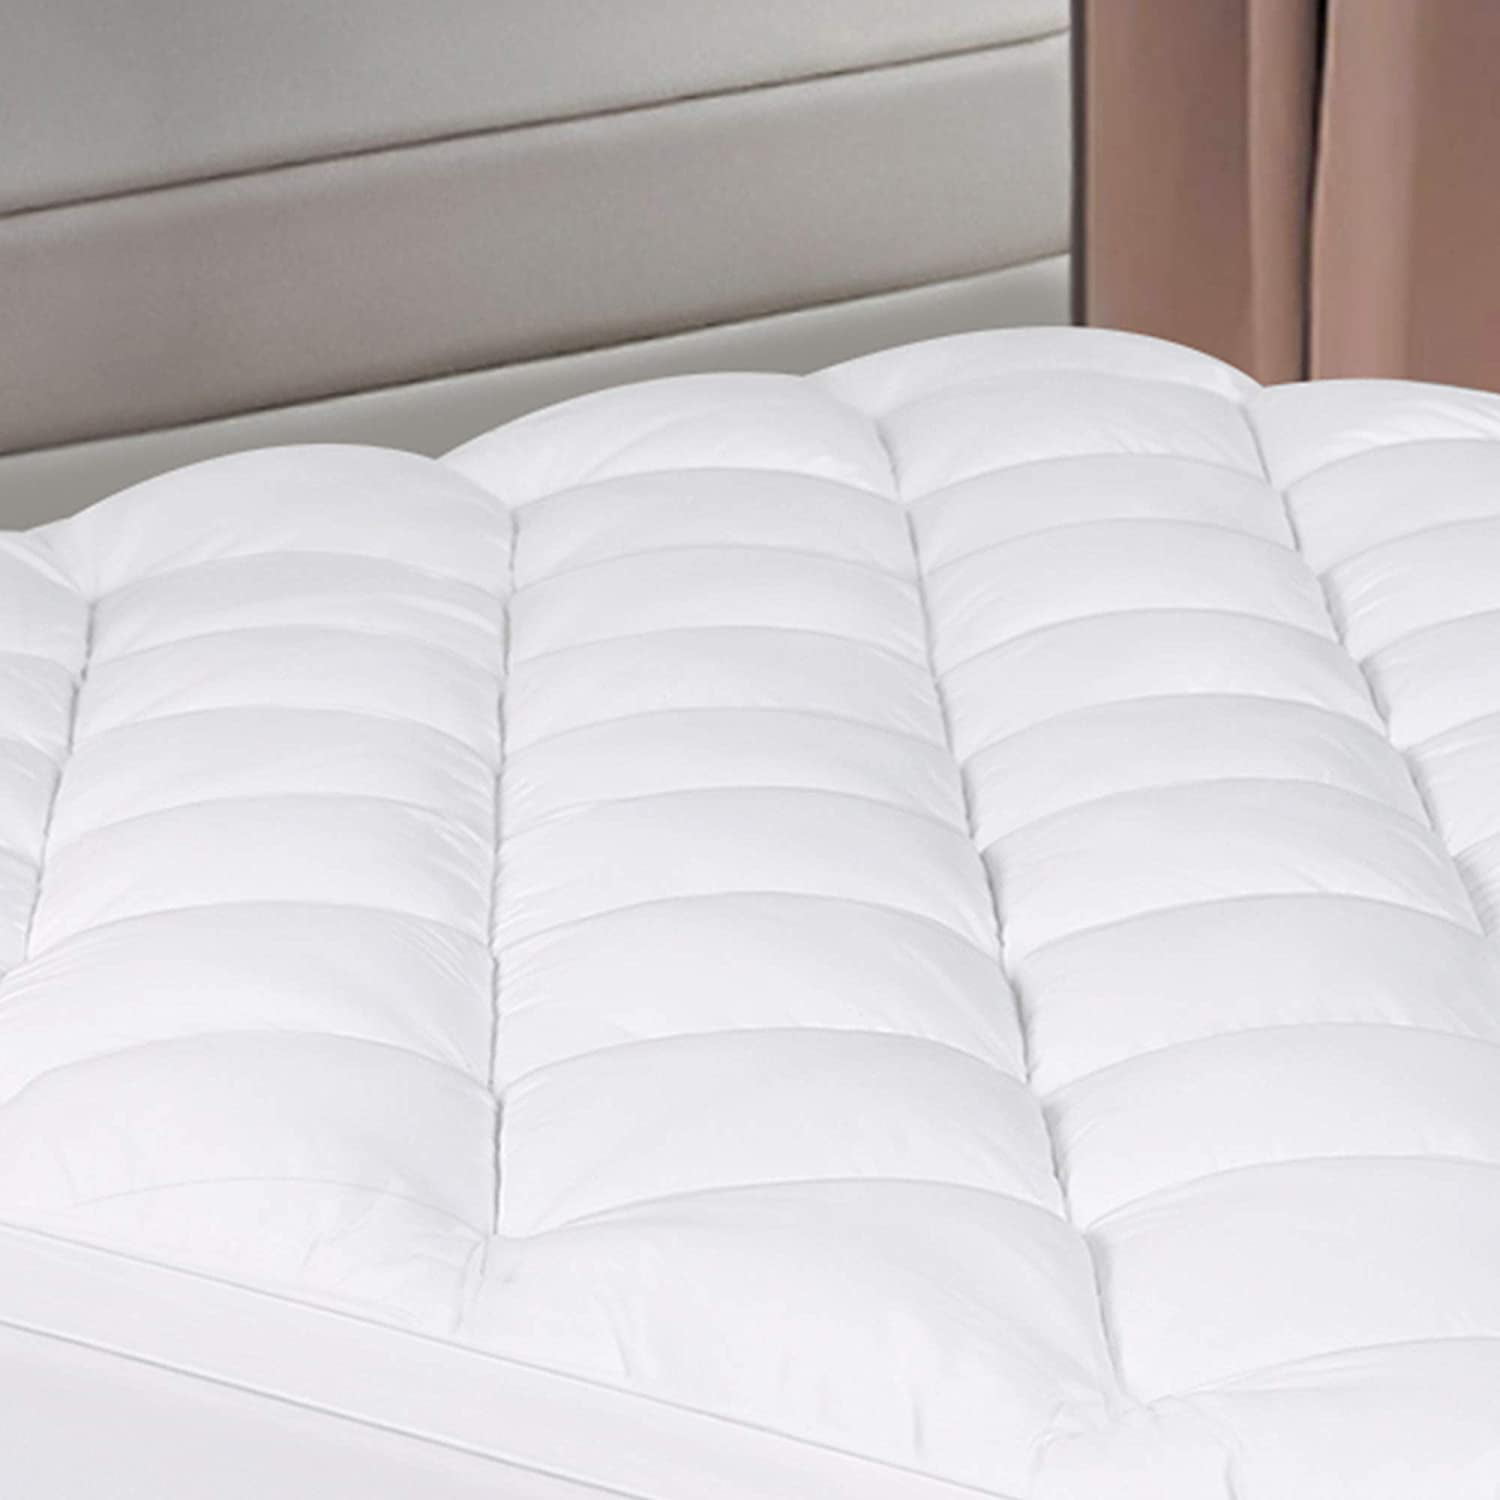 Details about   White Mattress Pad Soft Overfilled Plush Hypoallergenic Waterproof Bed Protector 